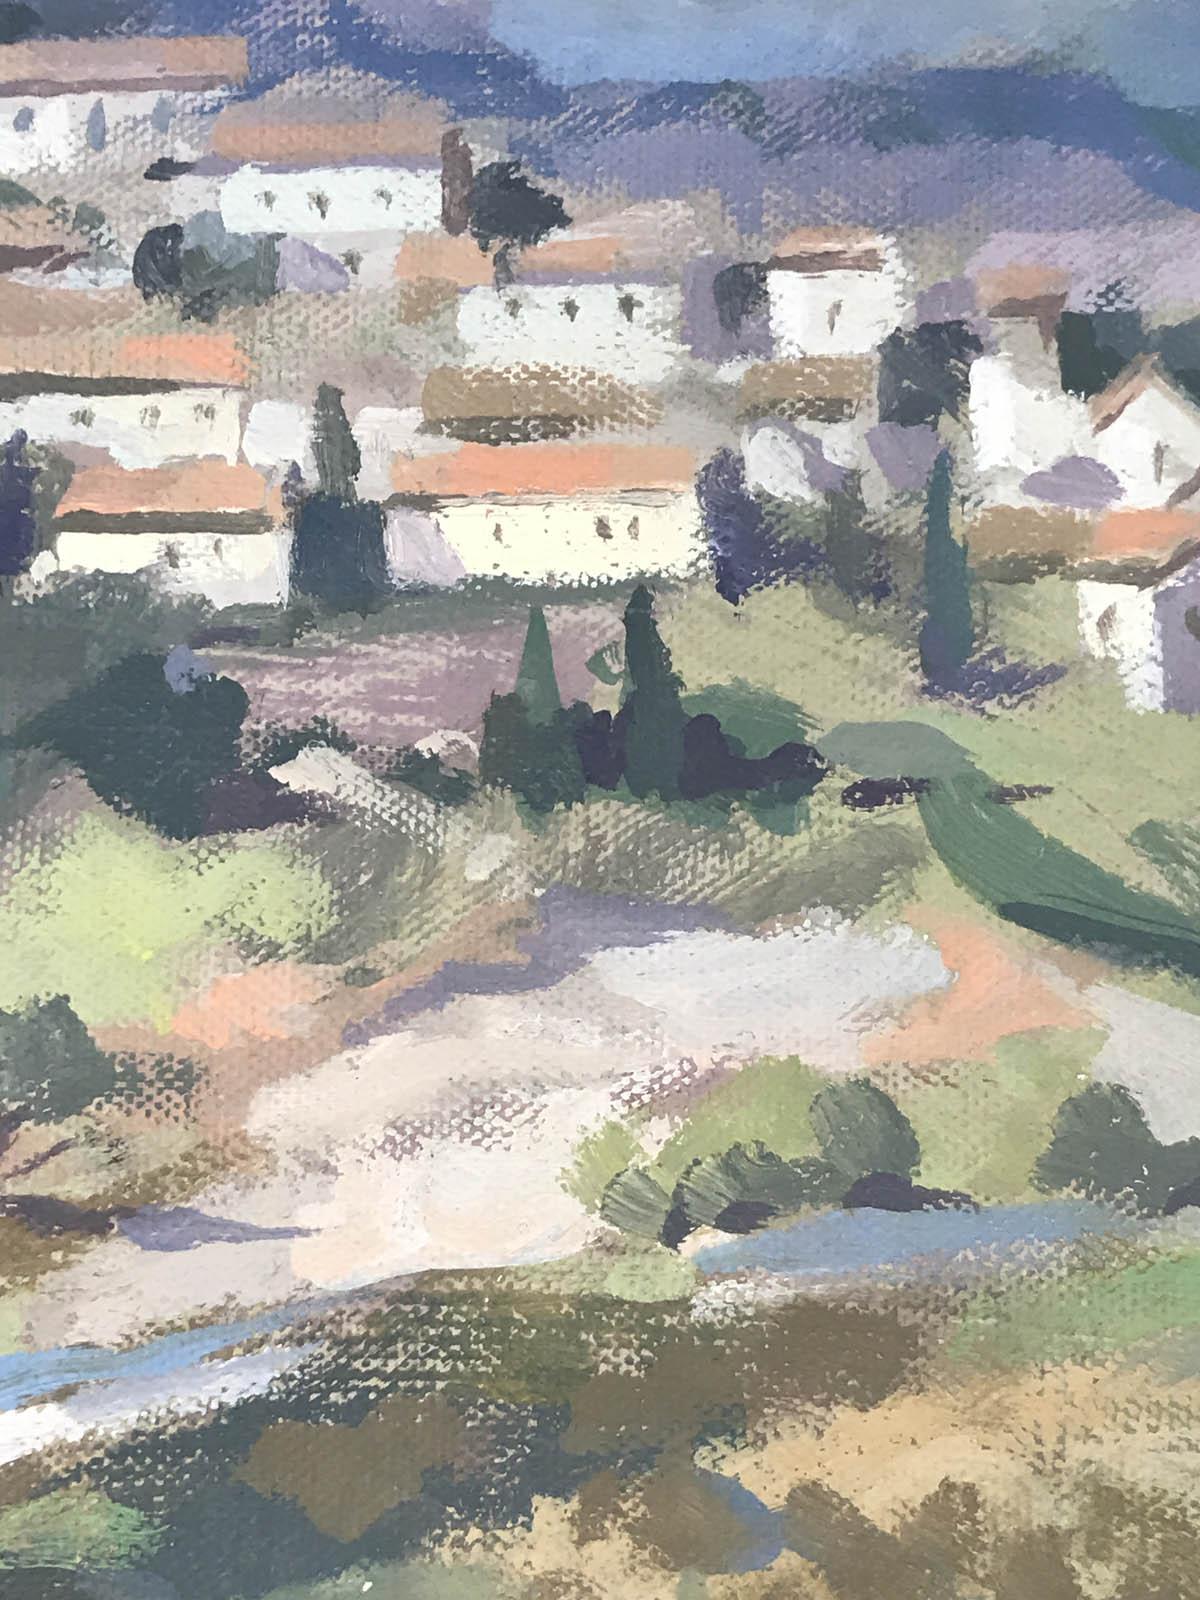 Trevor Waugh
Fanjeaux, South of France
Original Unframed Oil Painting
Oil Paint on Canvas Board
Size: H 40cm x W 51cm
Please note that in situ images are purely an indication of how a piece may look.

Fanjeaux, South of France is an original Trevor